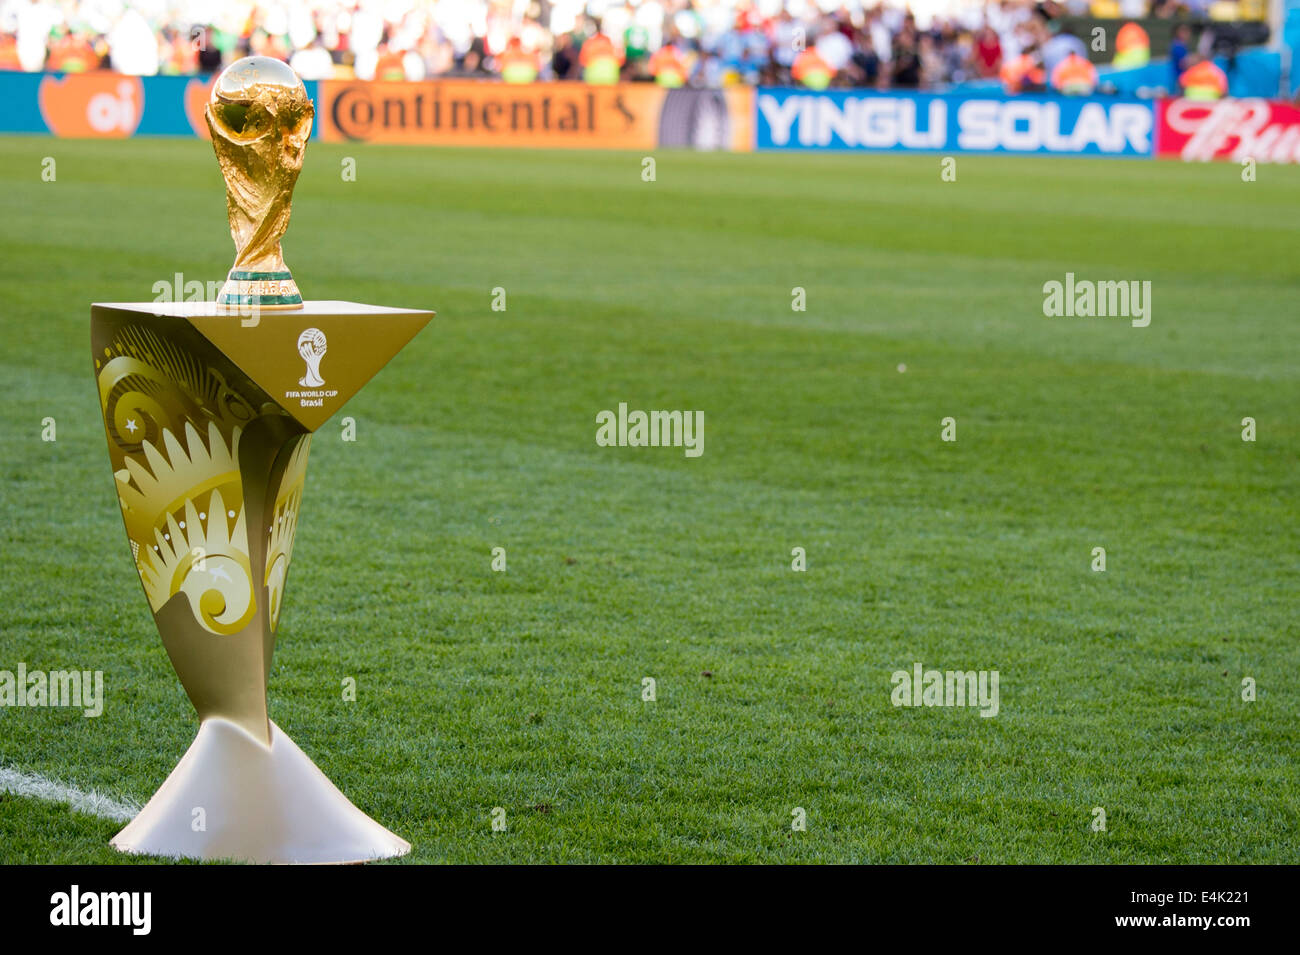 Rio de Janeiro, Brazil. 13th July, 2014. World Cup Trophy Football/Soccer : FIFA World Cup Brazil 2014 Final match between Germany 1-0 Argentina at the Maracana stadium in Rio de Janeiro, Brazil . Credit:  Maurizio Borsari/AFLO/Alamy Live News Stock Photo